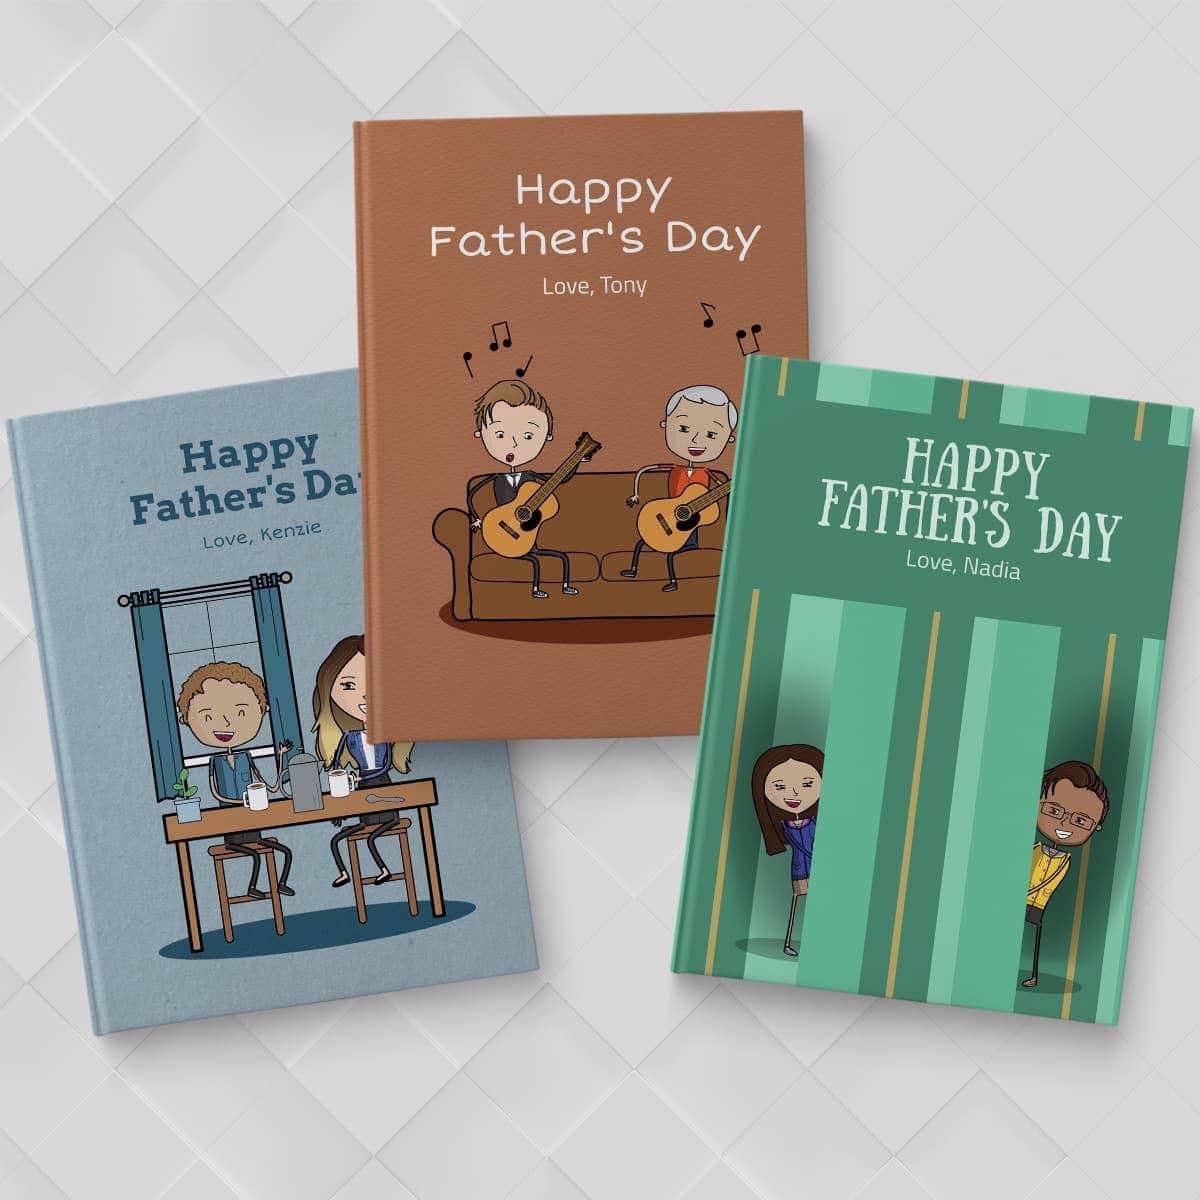 Fathers Day Gifts by LoveBook | The Personalized Gift Book That Says Why You Love Someone | LoveBook Online - 1